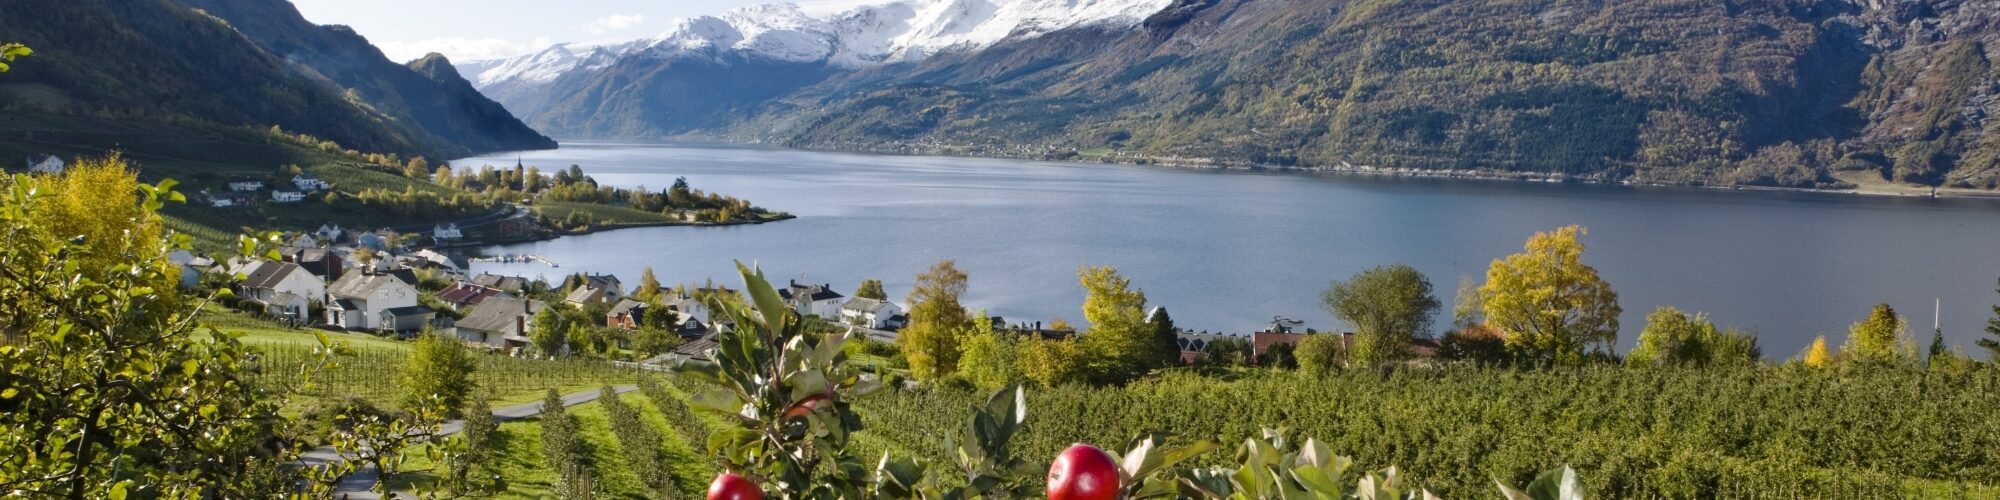 Panorama of Lofthus with green fruit orchards in the foreground, fjord and mountains in the background.